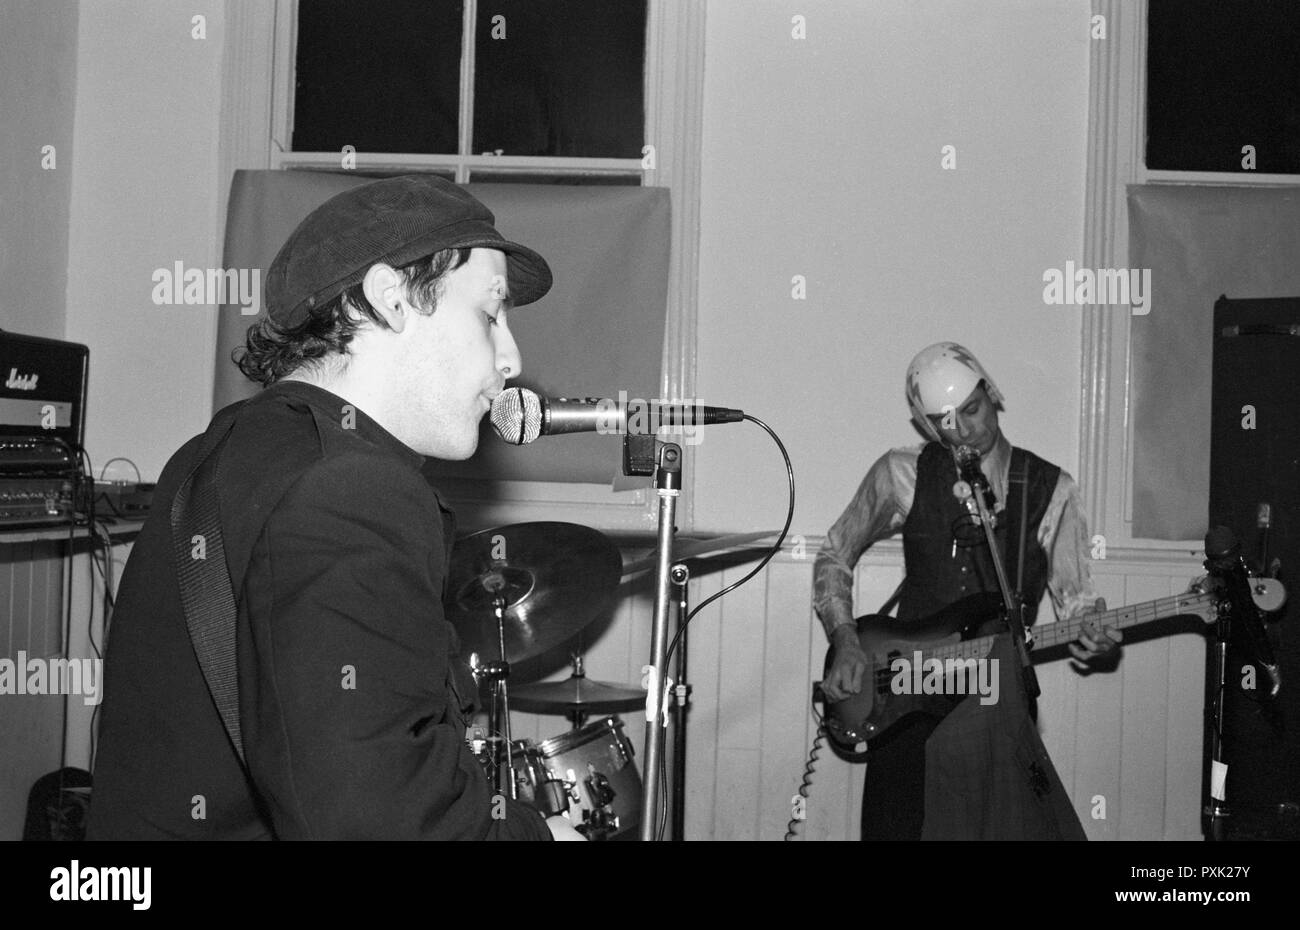 Dan Treacy and Jowe Head of post-punk band Television Personalities performing at the Horse and Groom, Bedford, UK, October 17th 1987. Stock Photo